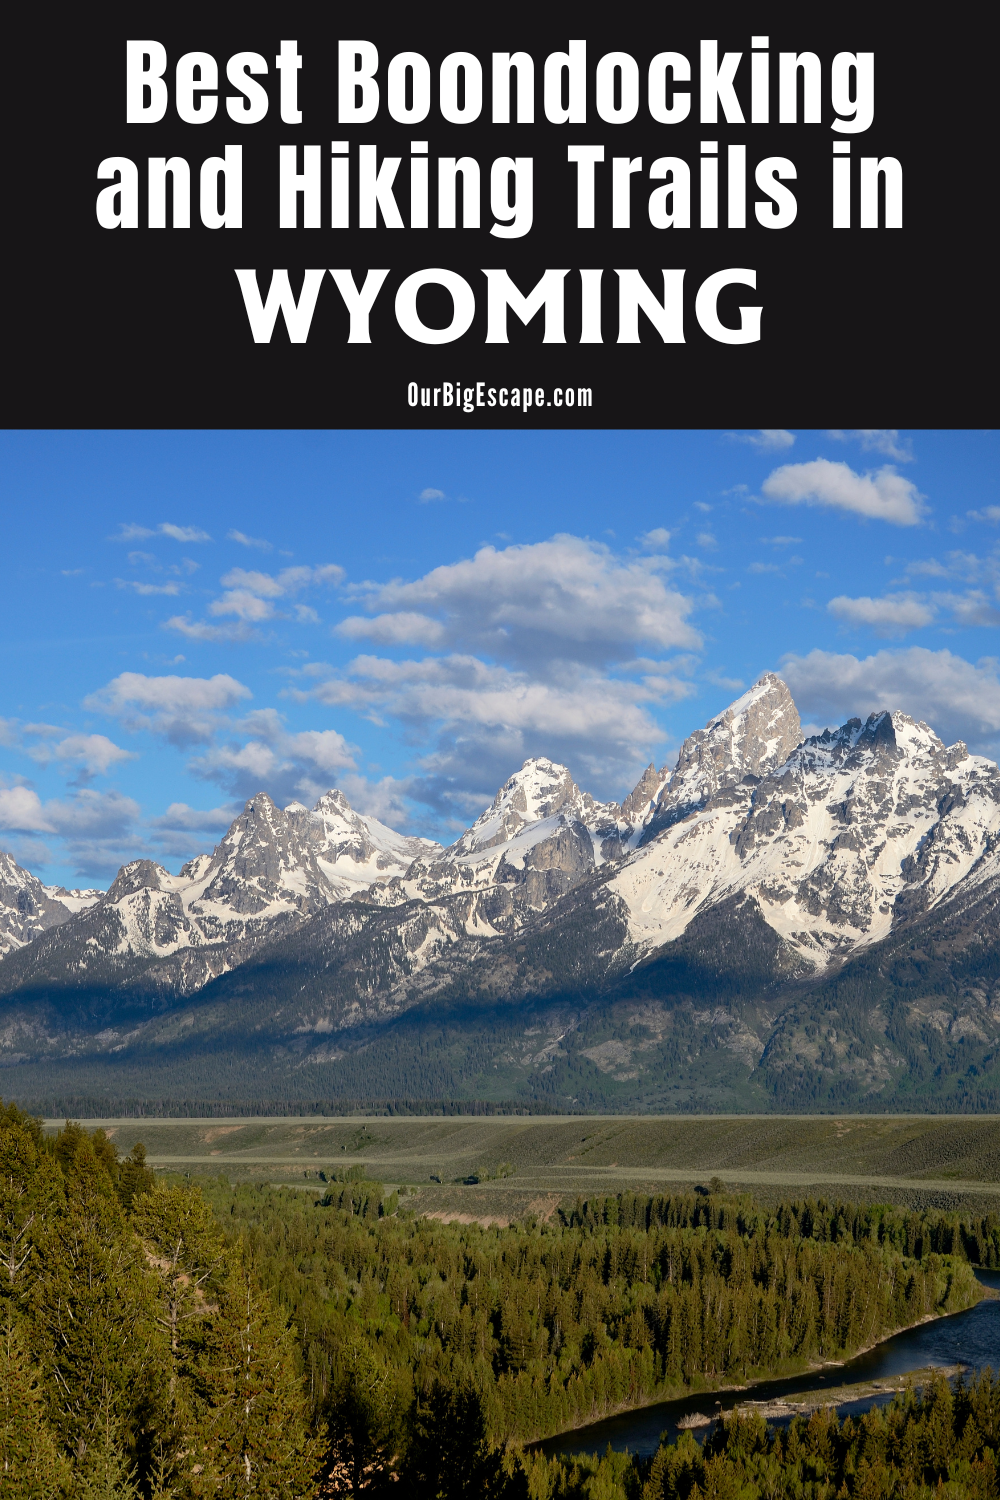 Best Boondocking and Hiking Trails in Wyoming